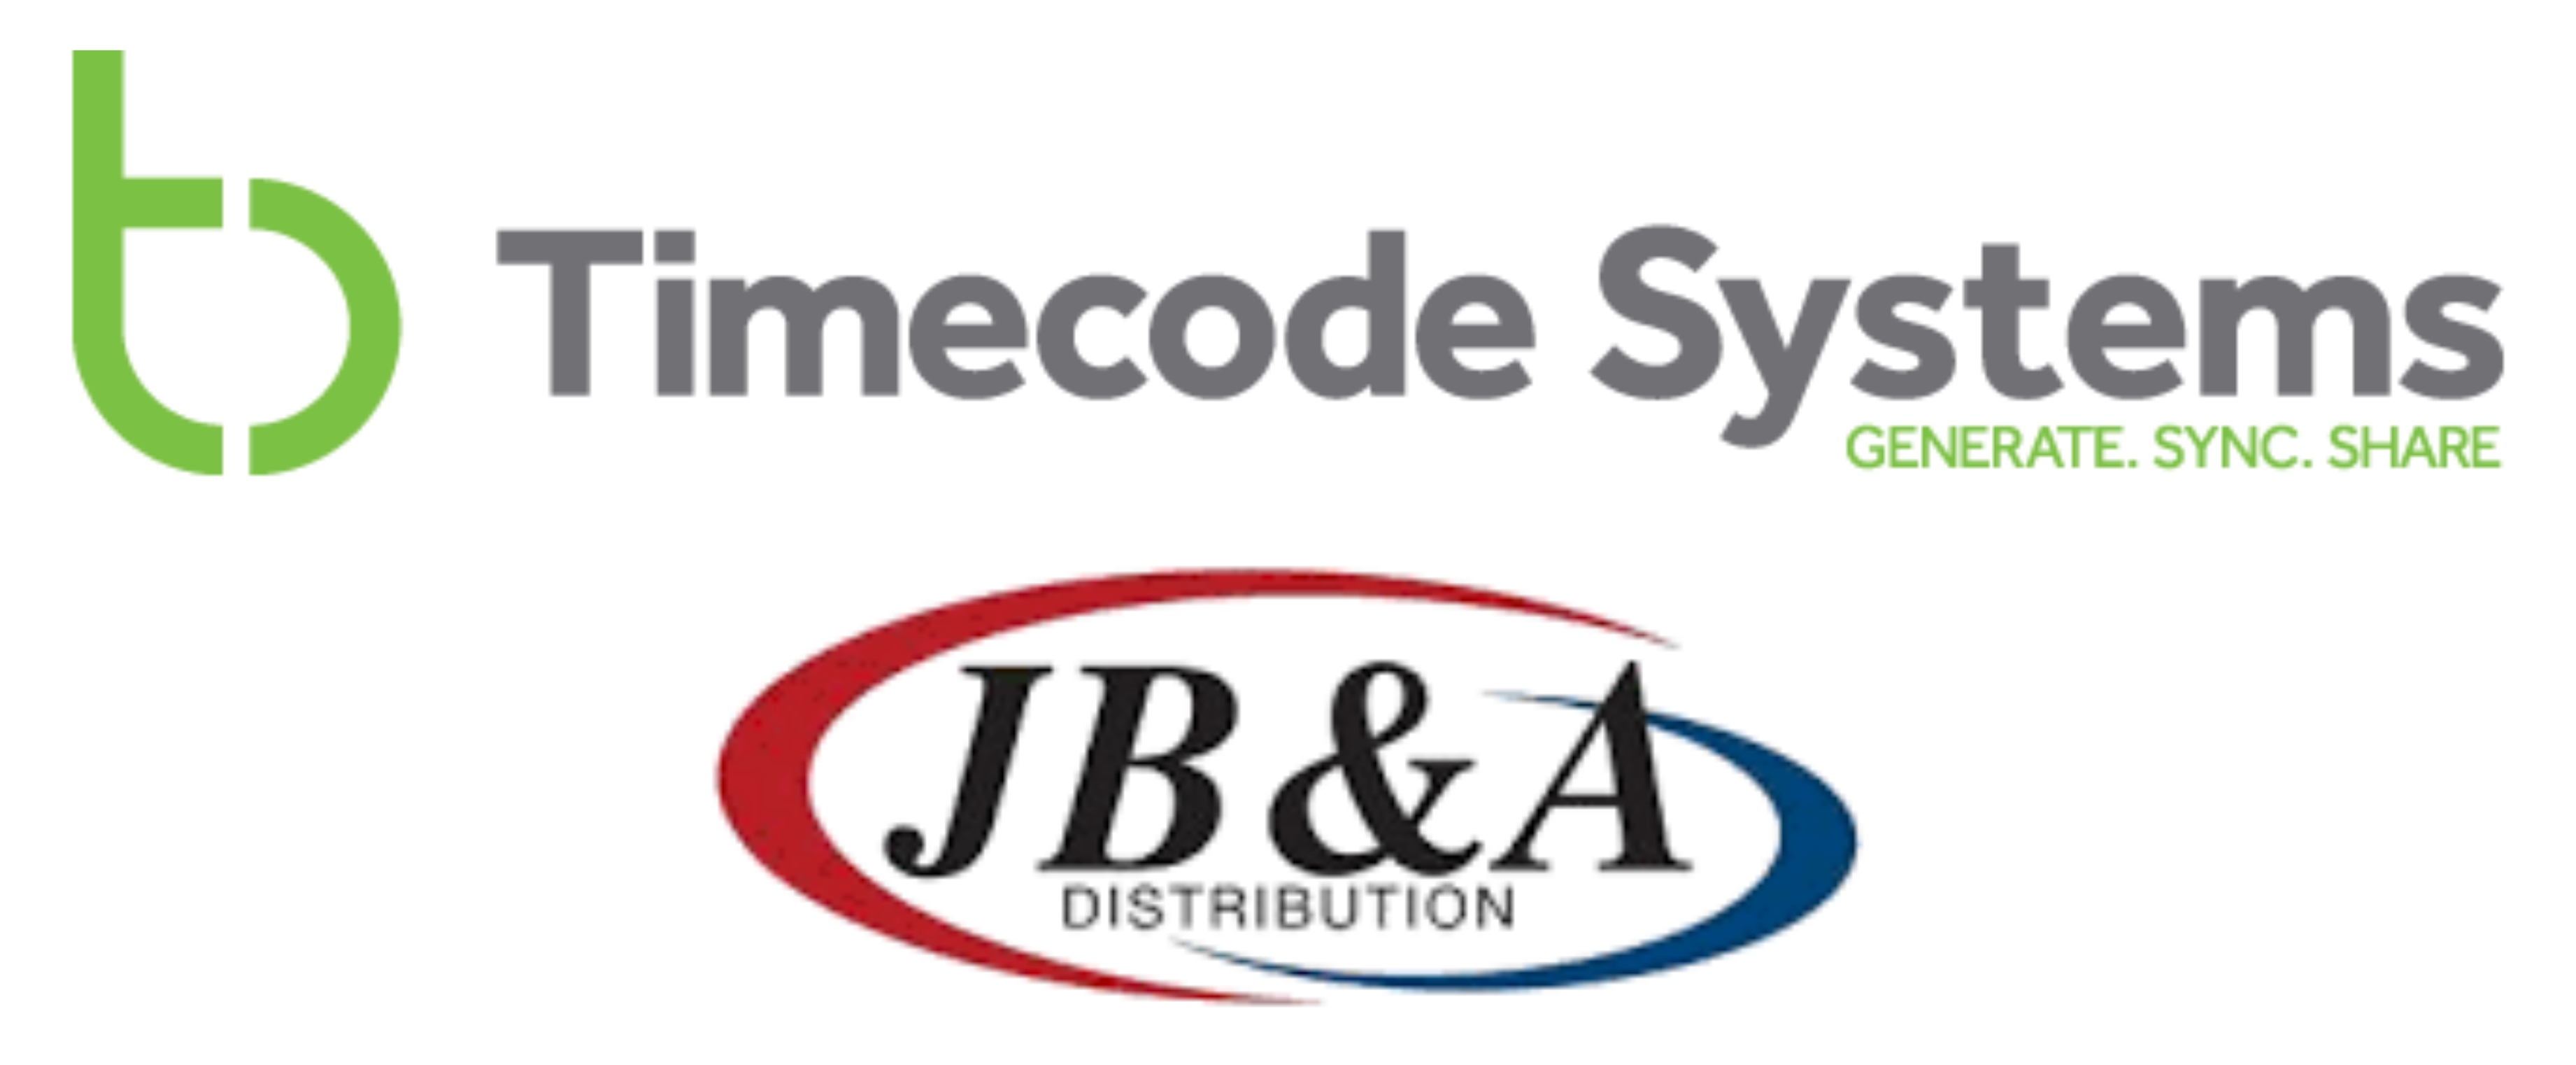 Timecode Systems Appoints New Distributor For North America Ahead of Shipping UltraSync ONE